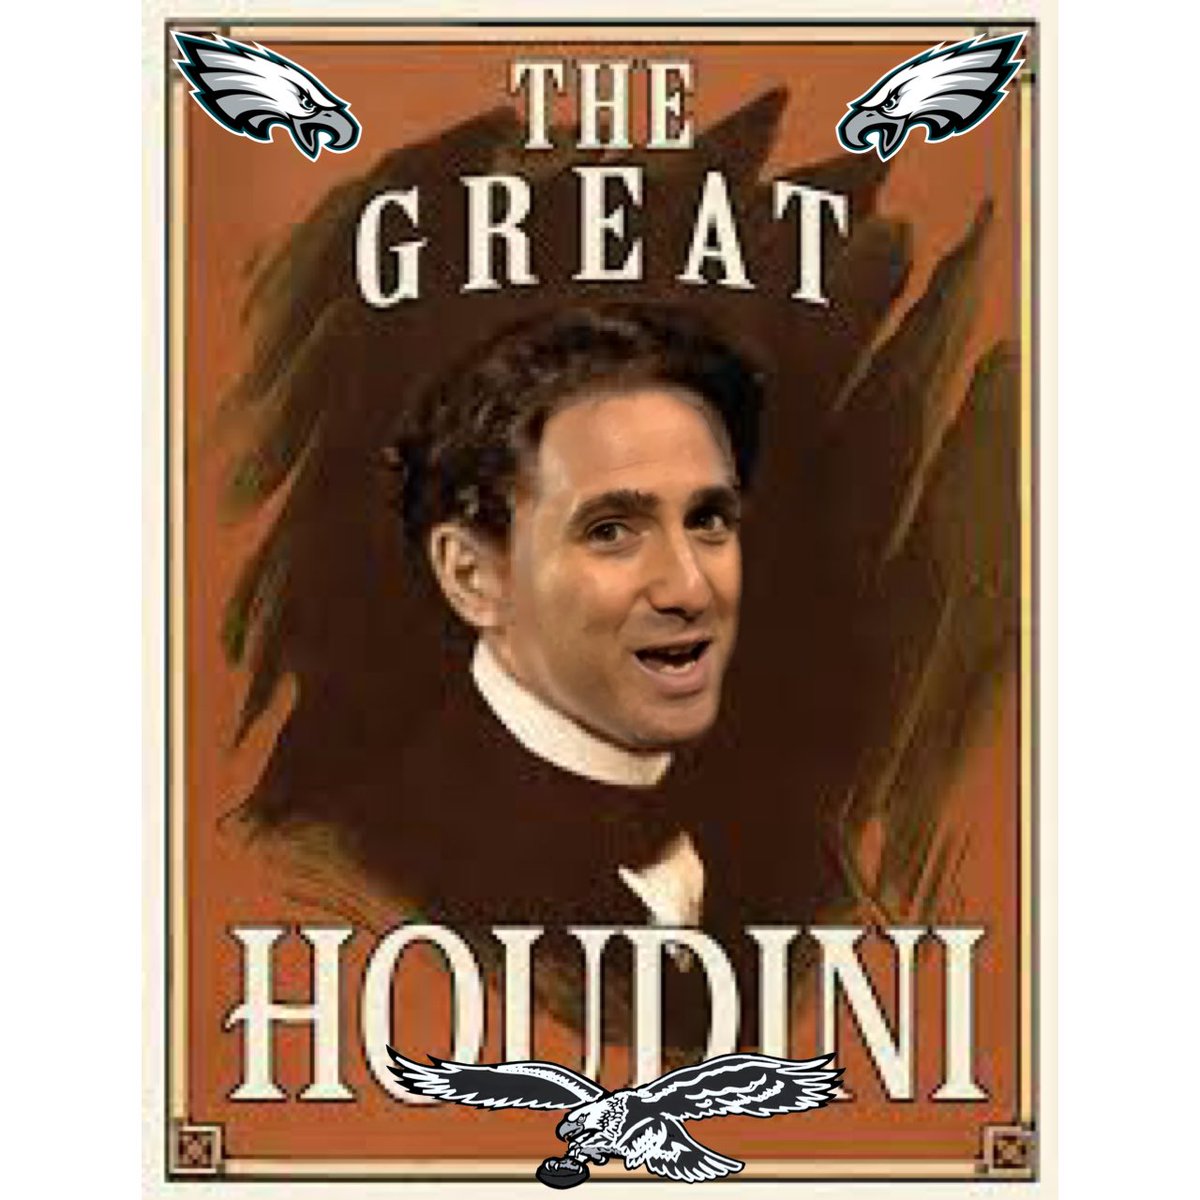 The great Howie Houdini will make great draft picks appear before your very eyes. #howiehoudini #FlyEaglesFly #GoBirds #philadelphiaeagles